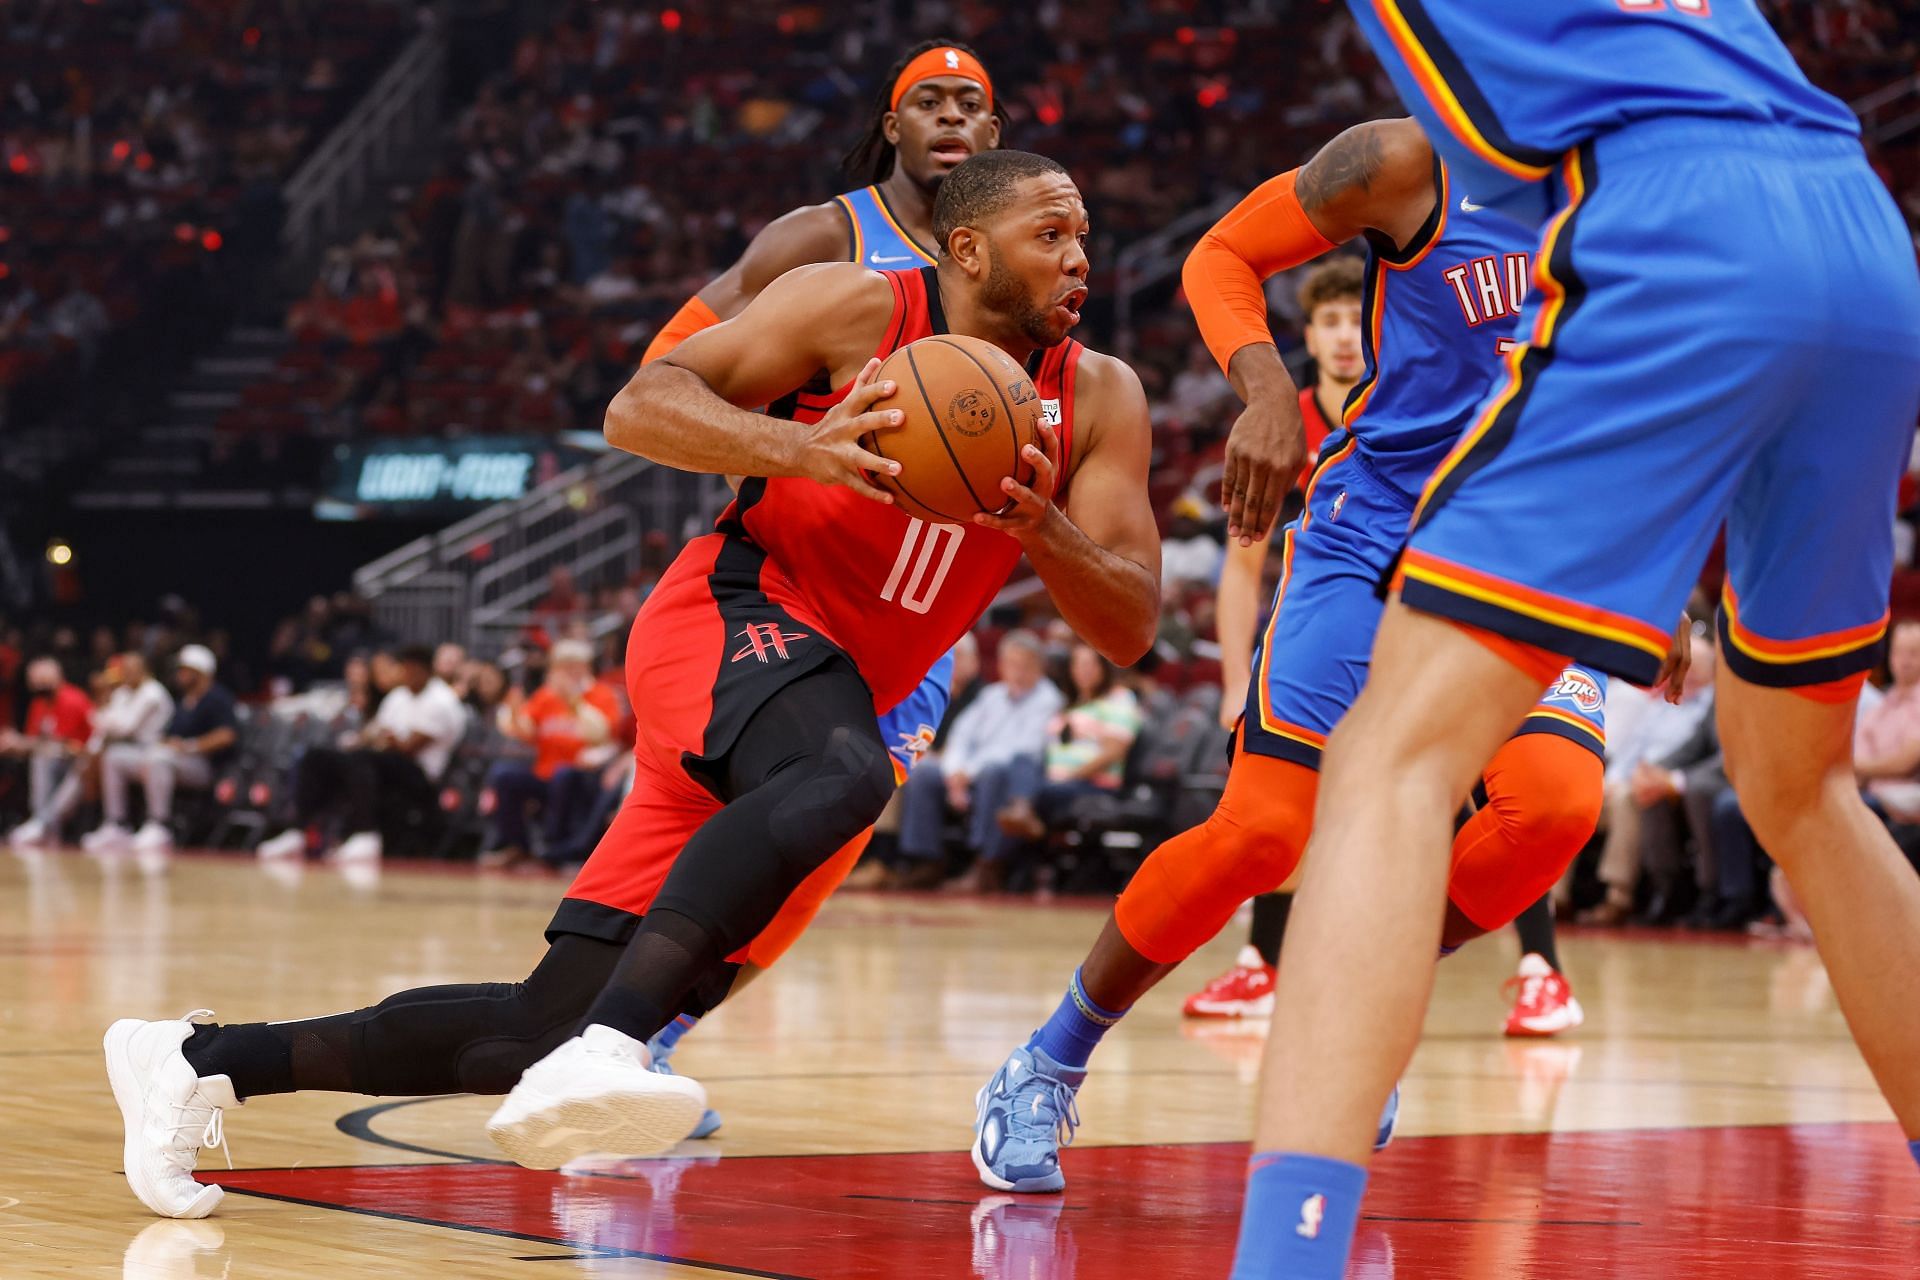 Eric Gordon #10 of the Houston Rockets drives to the basket in the first half against the Oklahoma City Thunder at Toyota Center on October 22, 2021 in Houston, Texas.